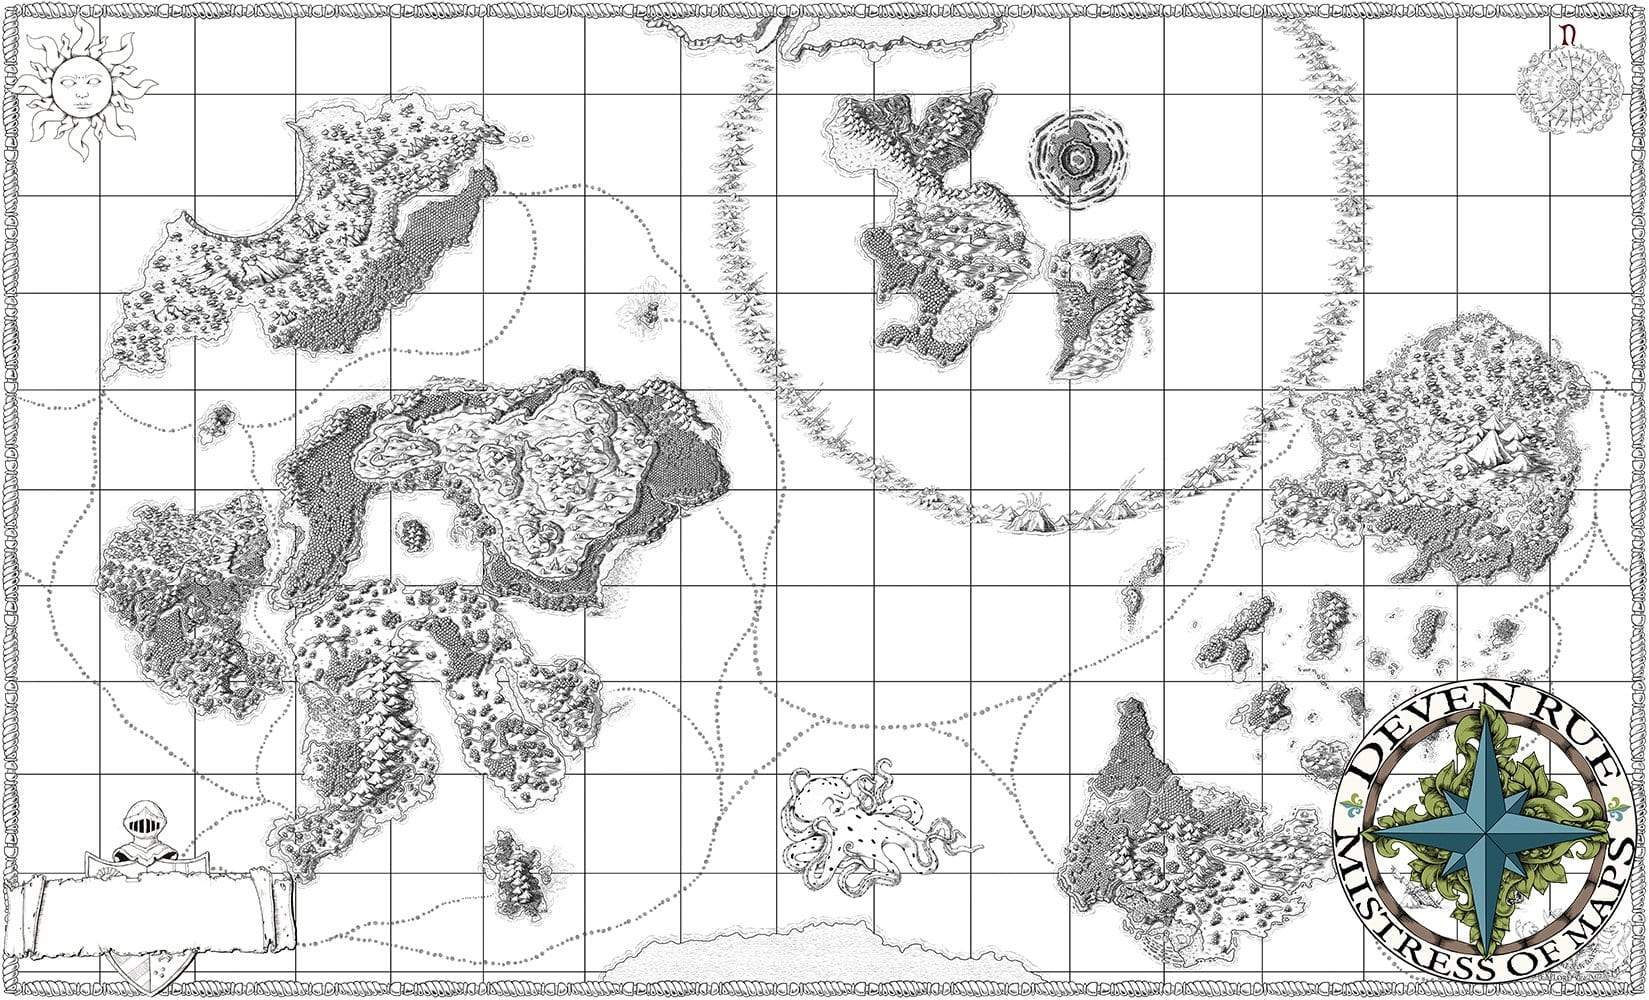 The Ifiron map in black and white with no labels by Deven Rue.